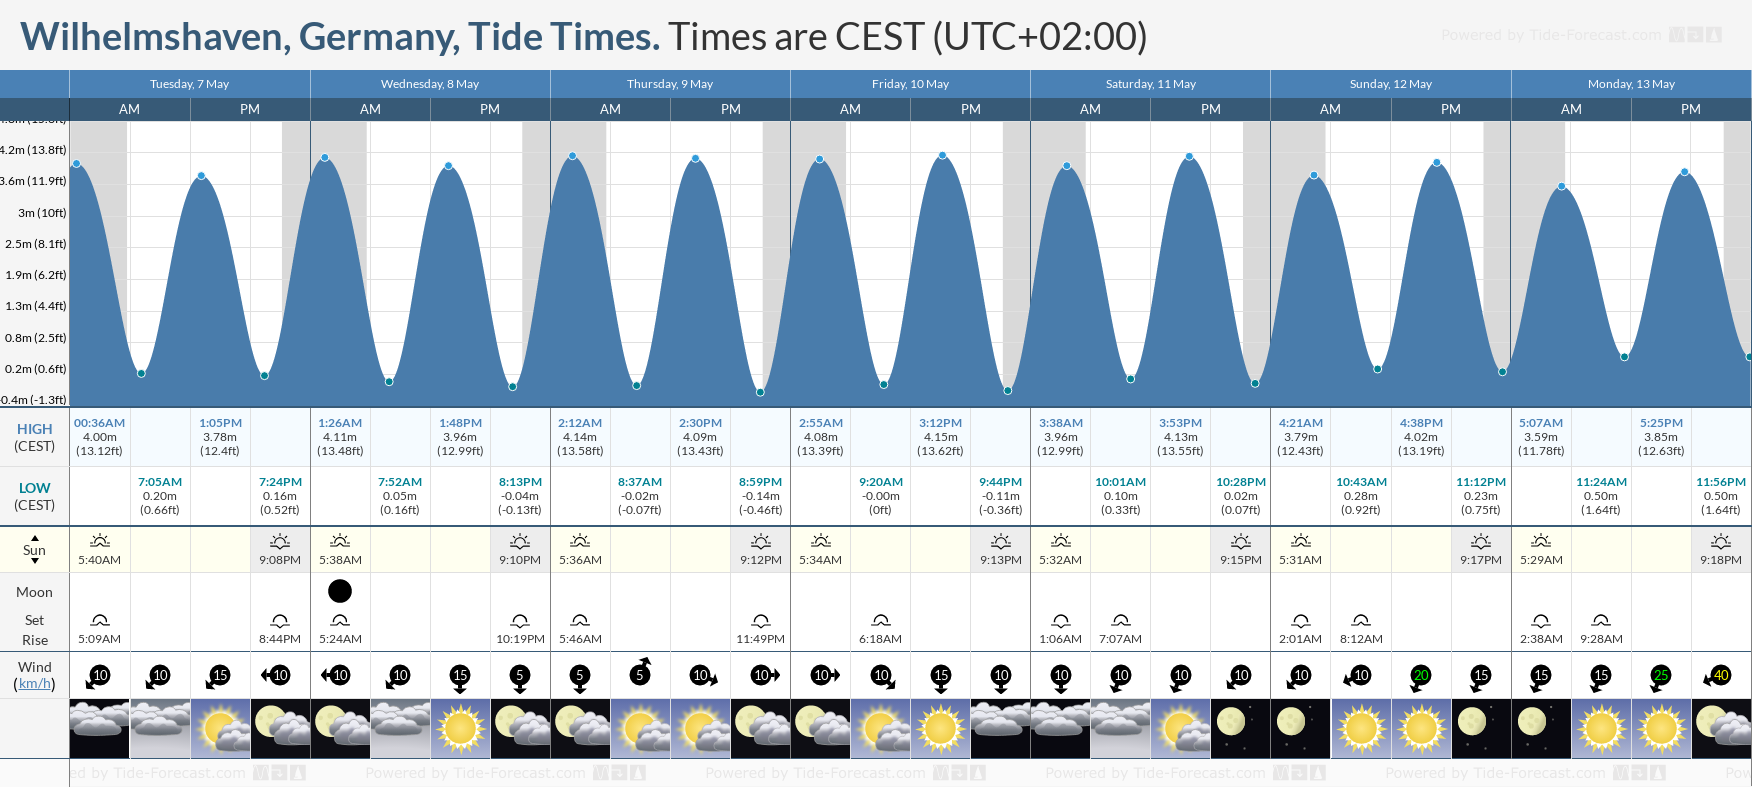 Wilhelmshaven, Germany Tide Chart including high and low tide tide times for the next 7 days